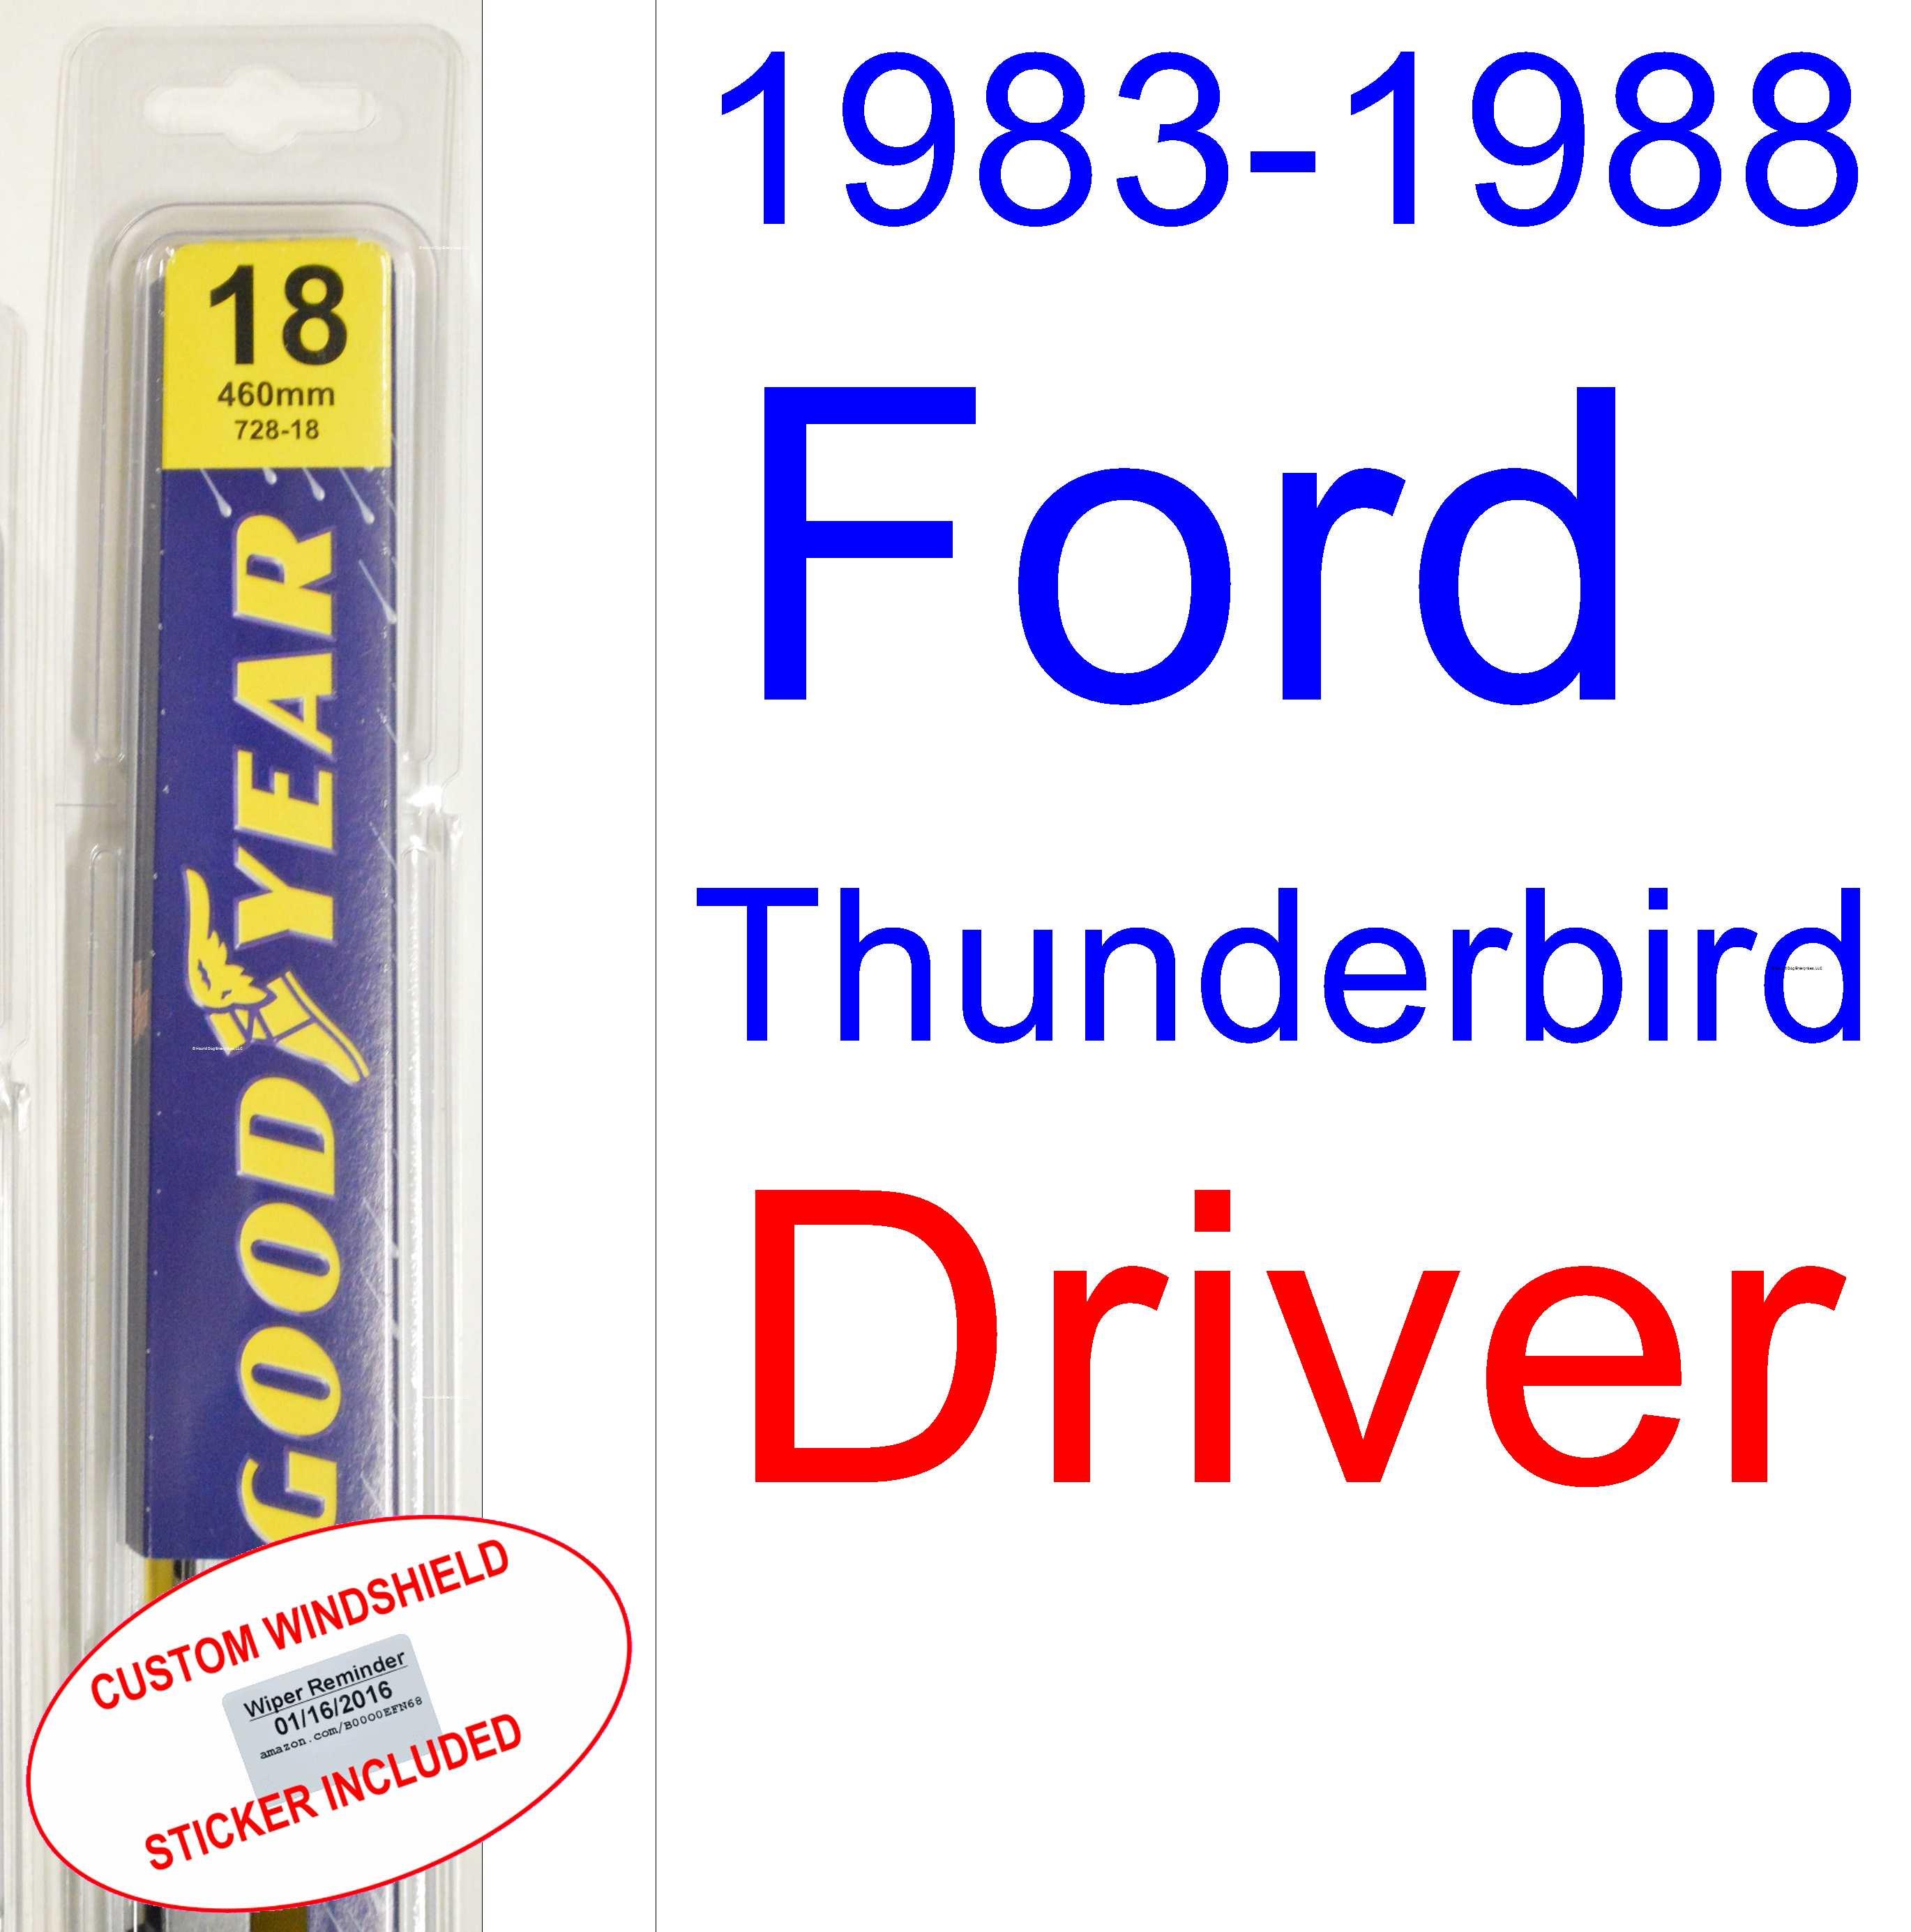 1983 1988 Ford Thunderbird Replacement Wiper Blade Set/Kit (Set of 2 Blades) (1984,1985,1986,1987)